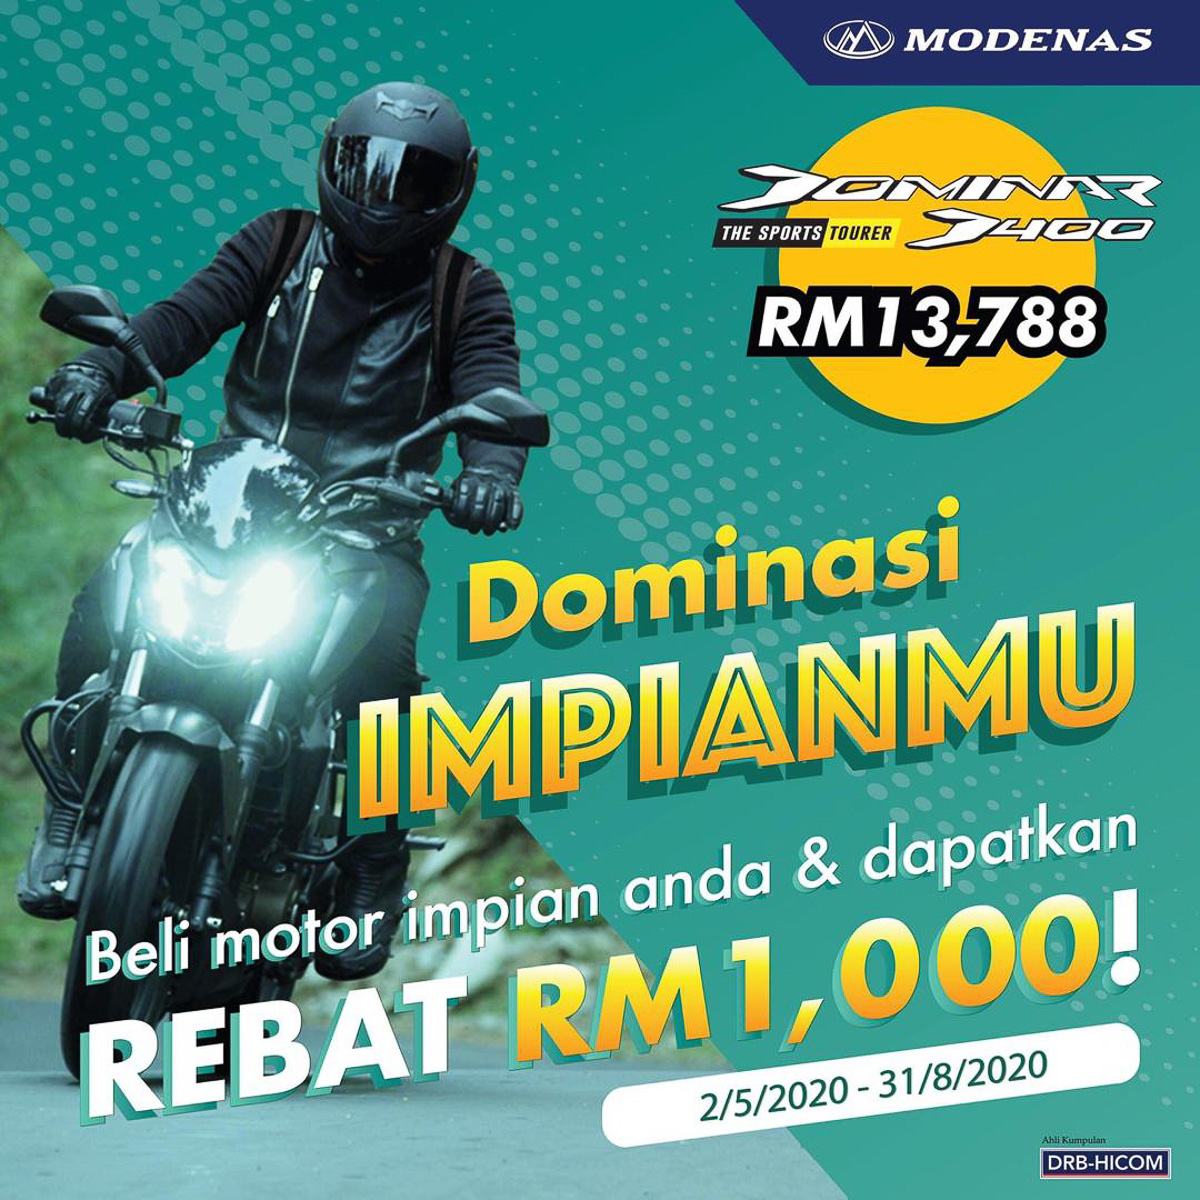 RM1,000 rebate for Modenas Dominar D400 u2013 now only RM12,788 